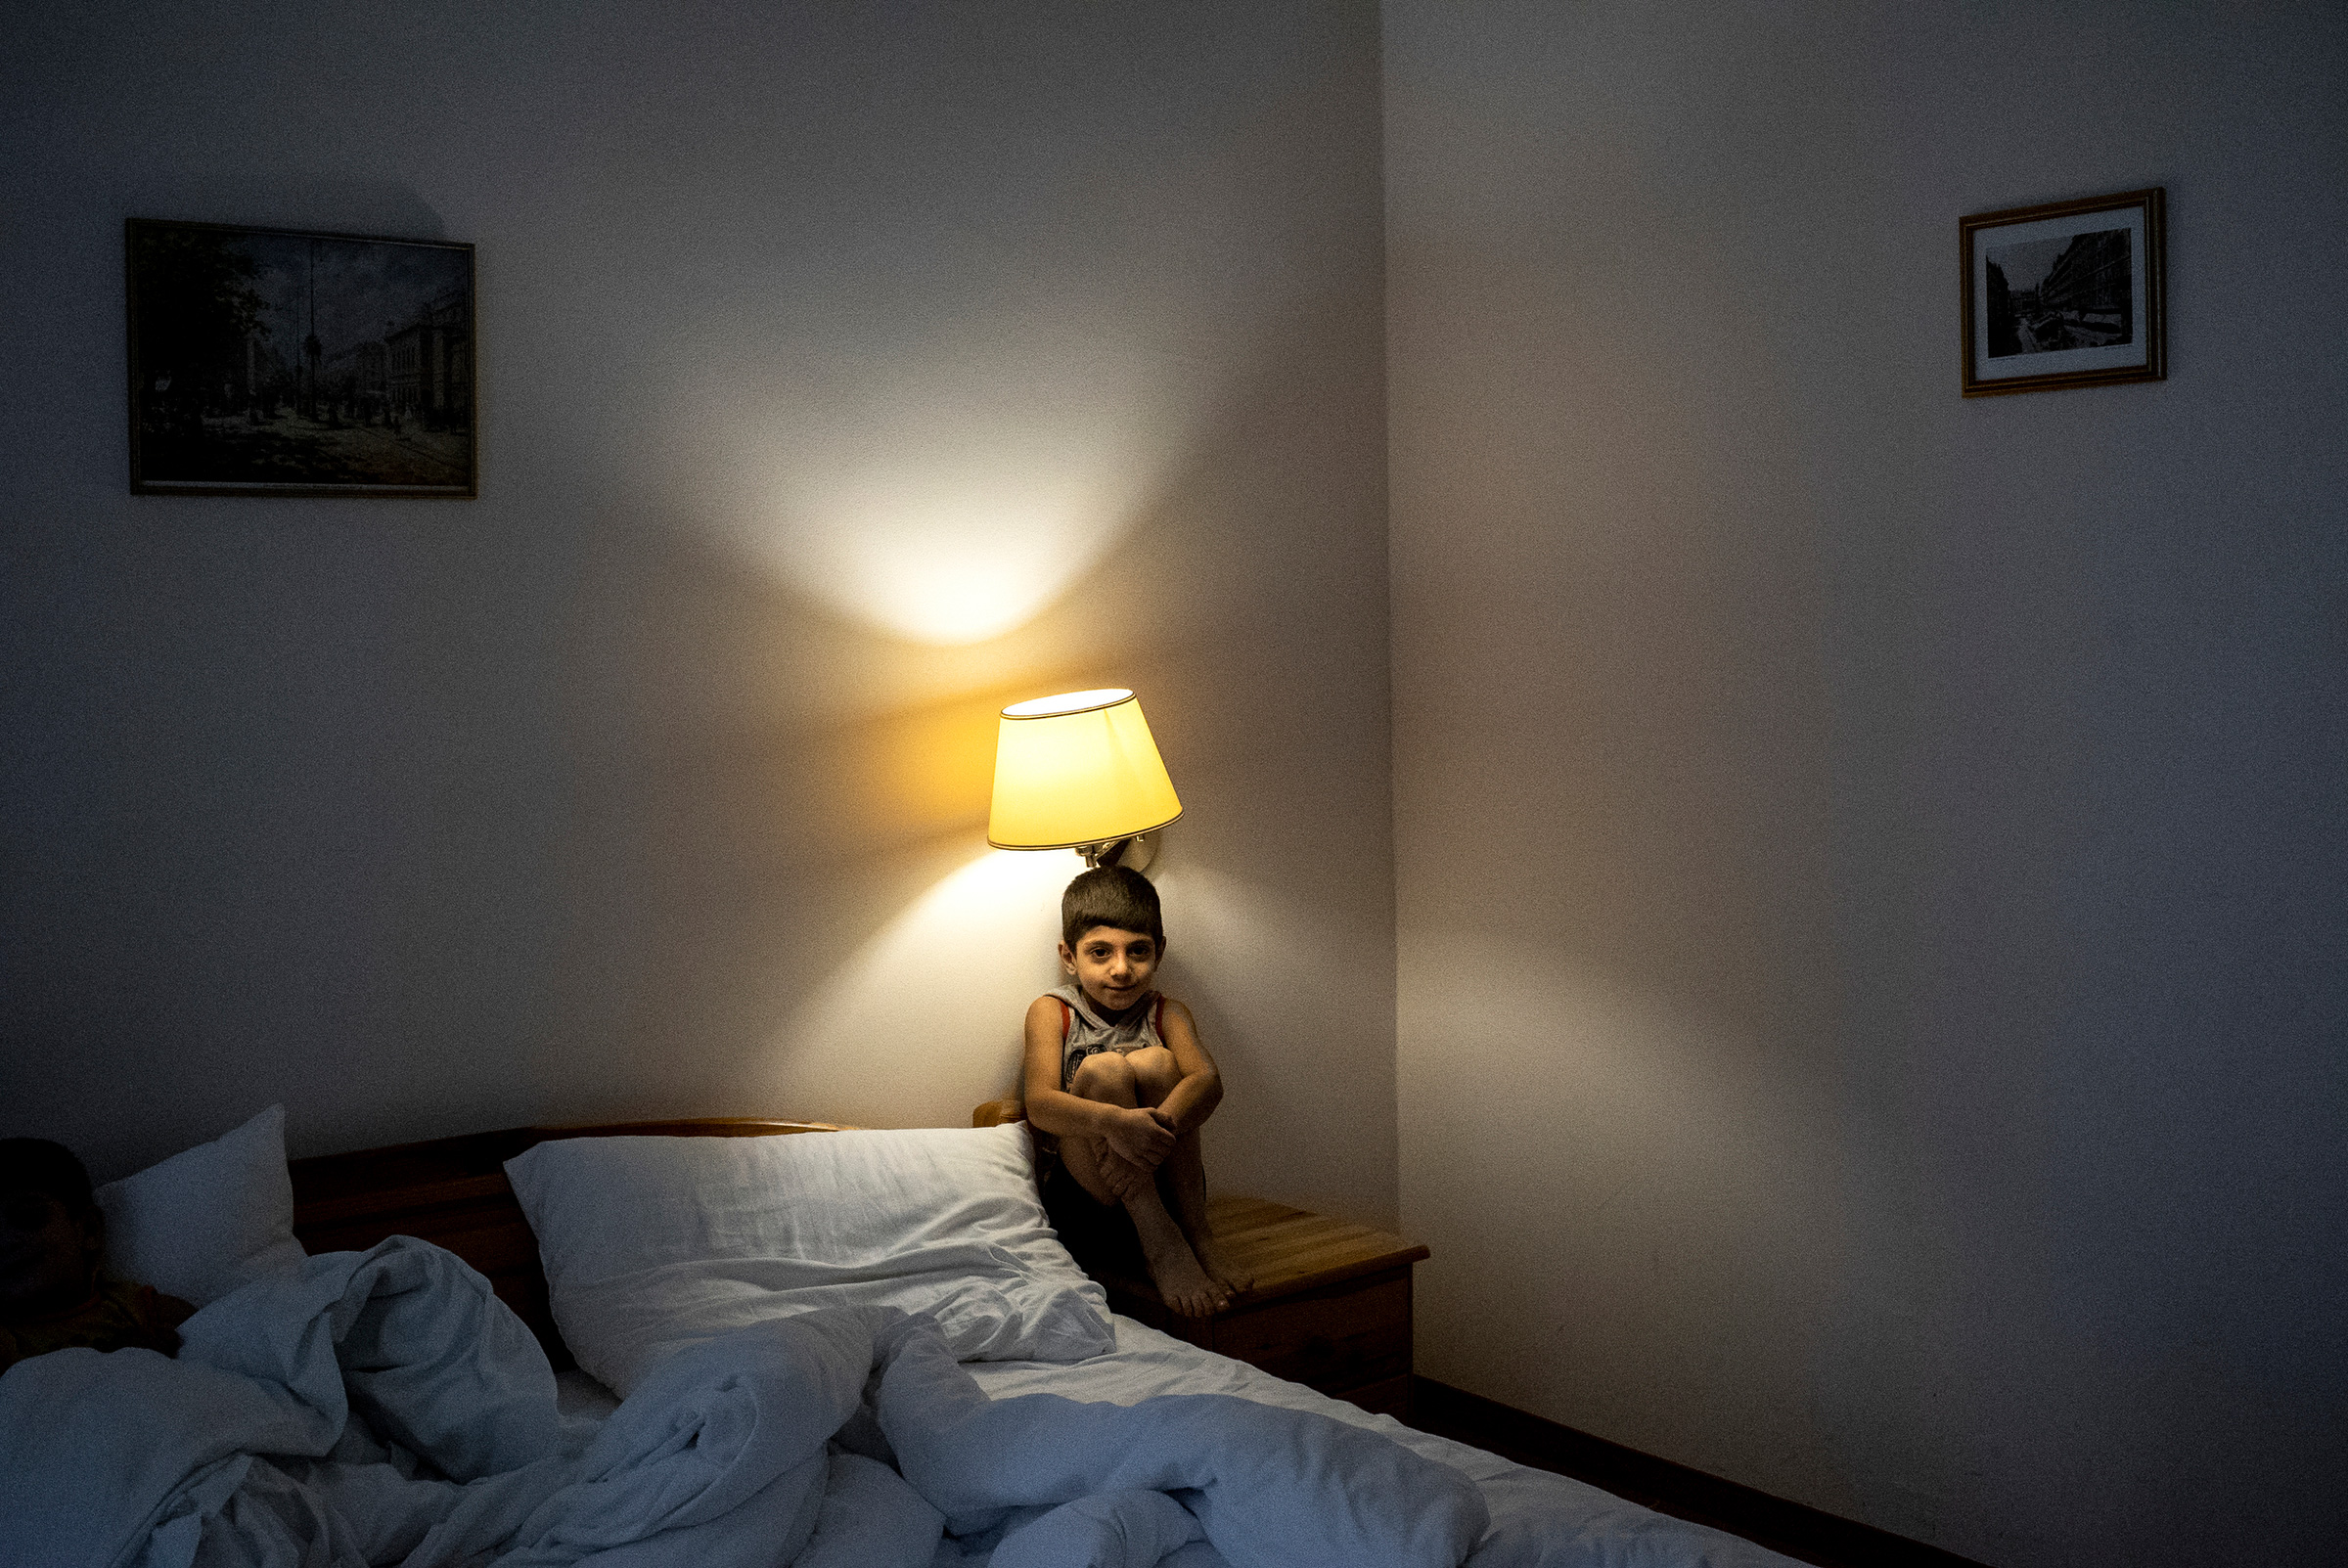 Ali, a Syrian refugee who arrived that evening in Vienna with his family after weeks on the refugee trail. The next day they continued their journey to a new life in Sweden. Vienna, 2015. (Peter van Agtmael—Magnum Photos)